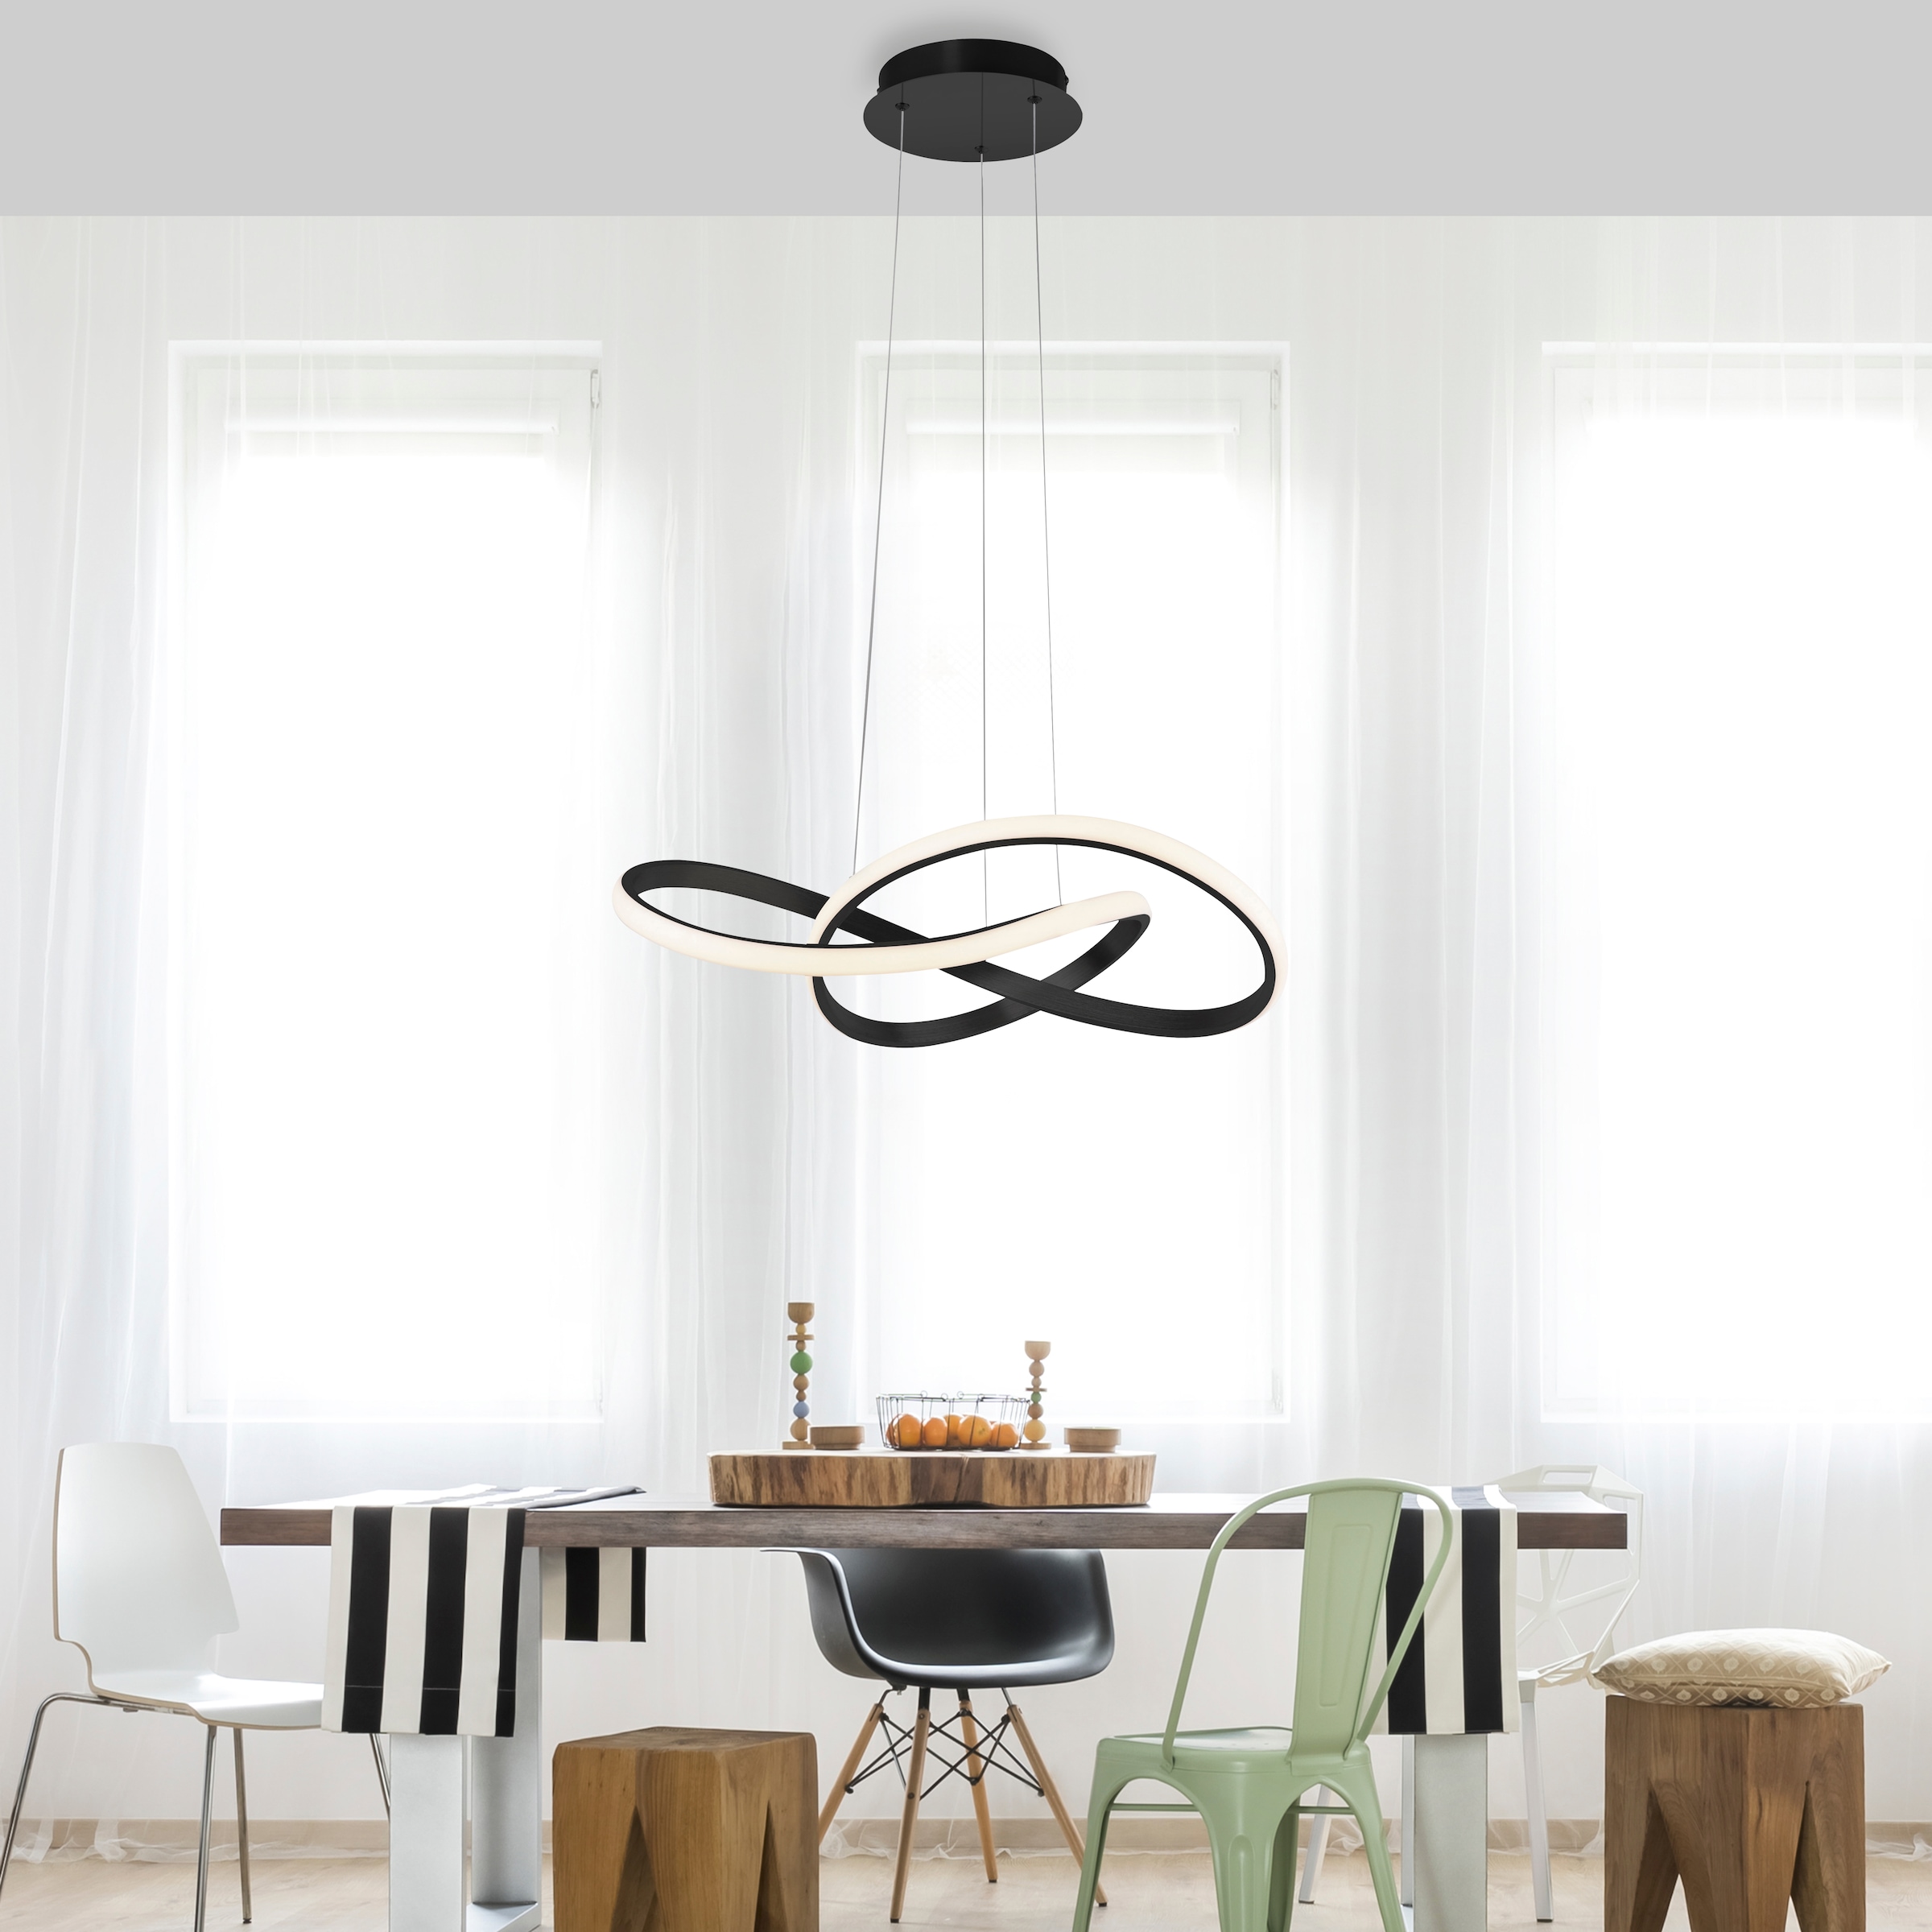 LIGHT JUST dimmbar, Pendelleuchte bei OTTO flammig-flammig, LED, 1 »MARIA«, Switchmo online